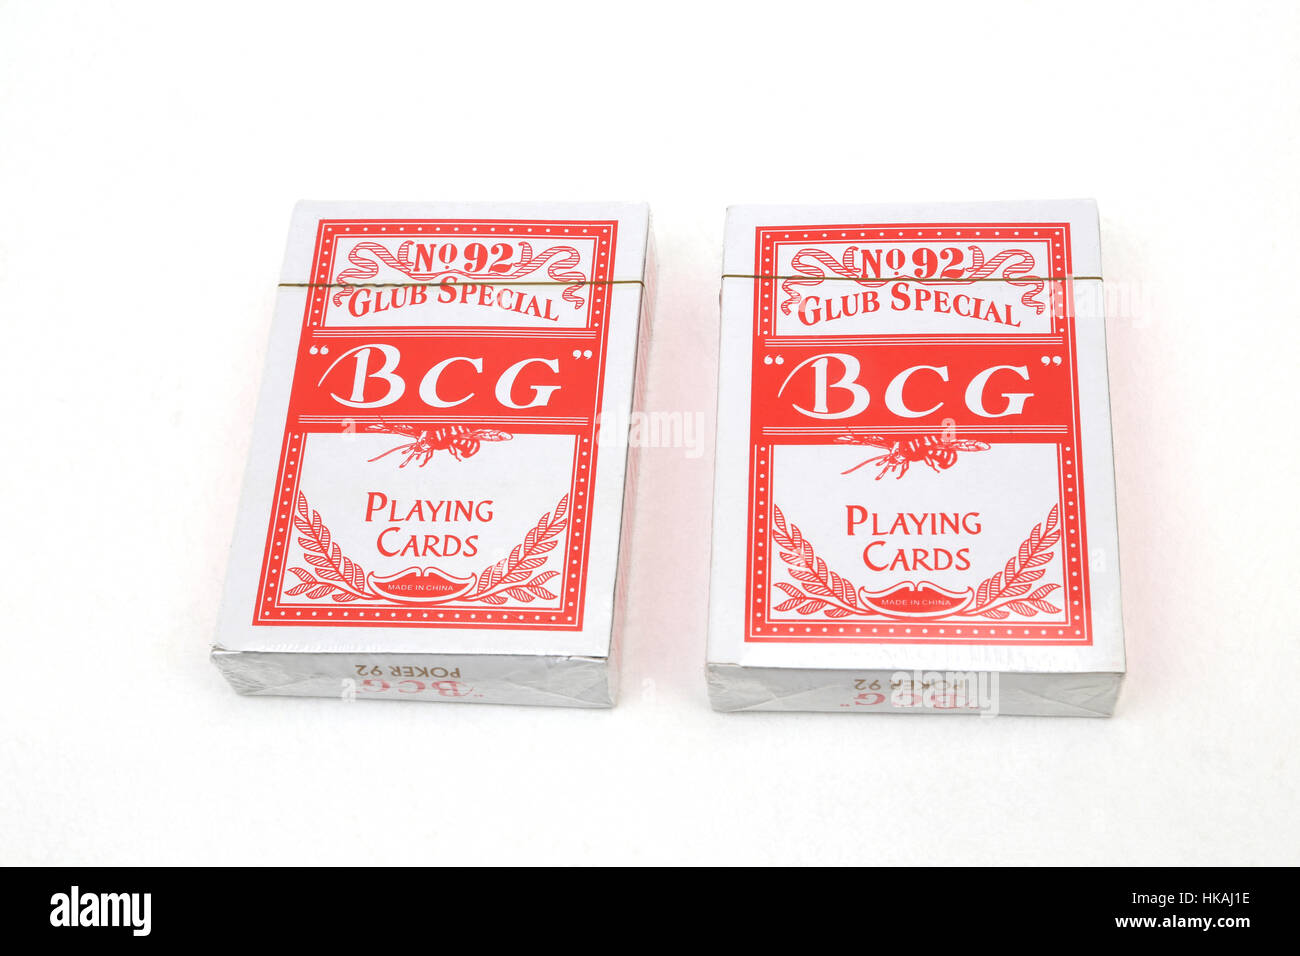 No 92 club Special BCG Playing Cards 